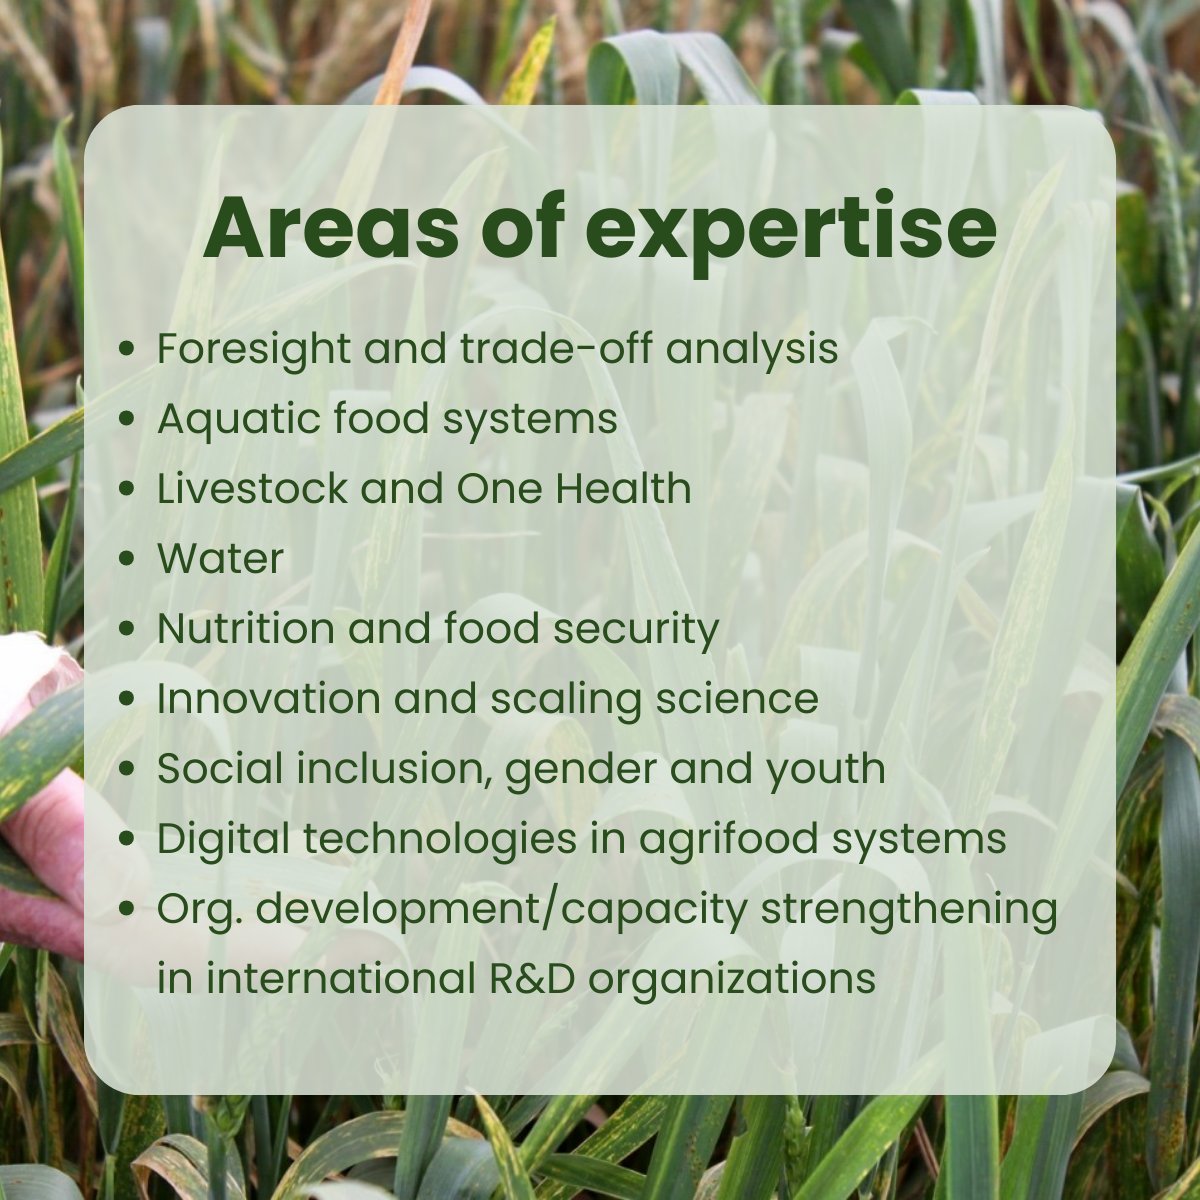 📢Are you a Subject Matter Expert in any of these areas? If so, IAES is looking for you! ➡️More information: iaes.cgiar.org/news/subject-m…